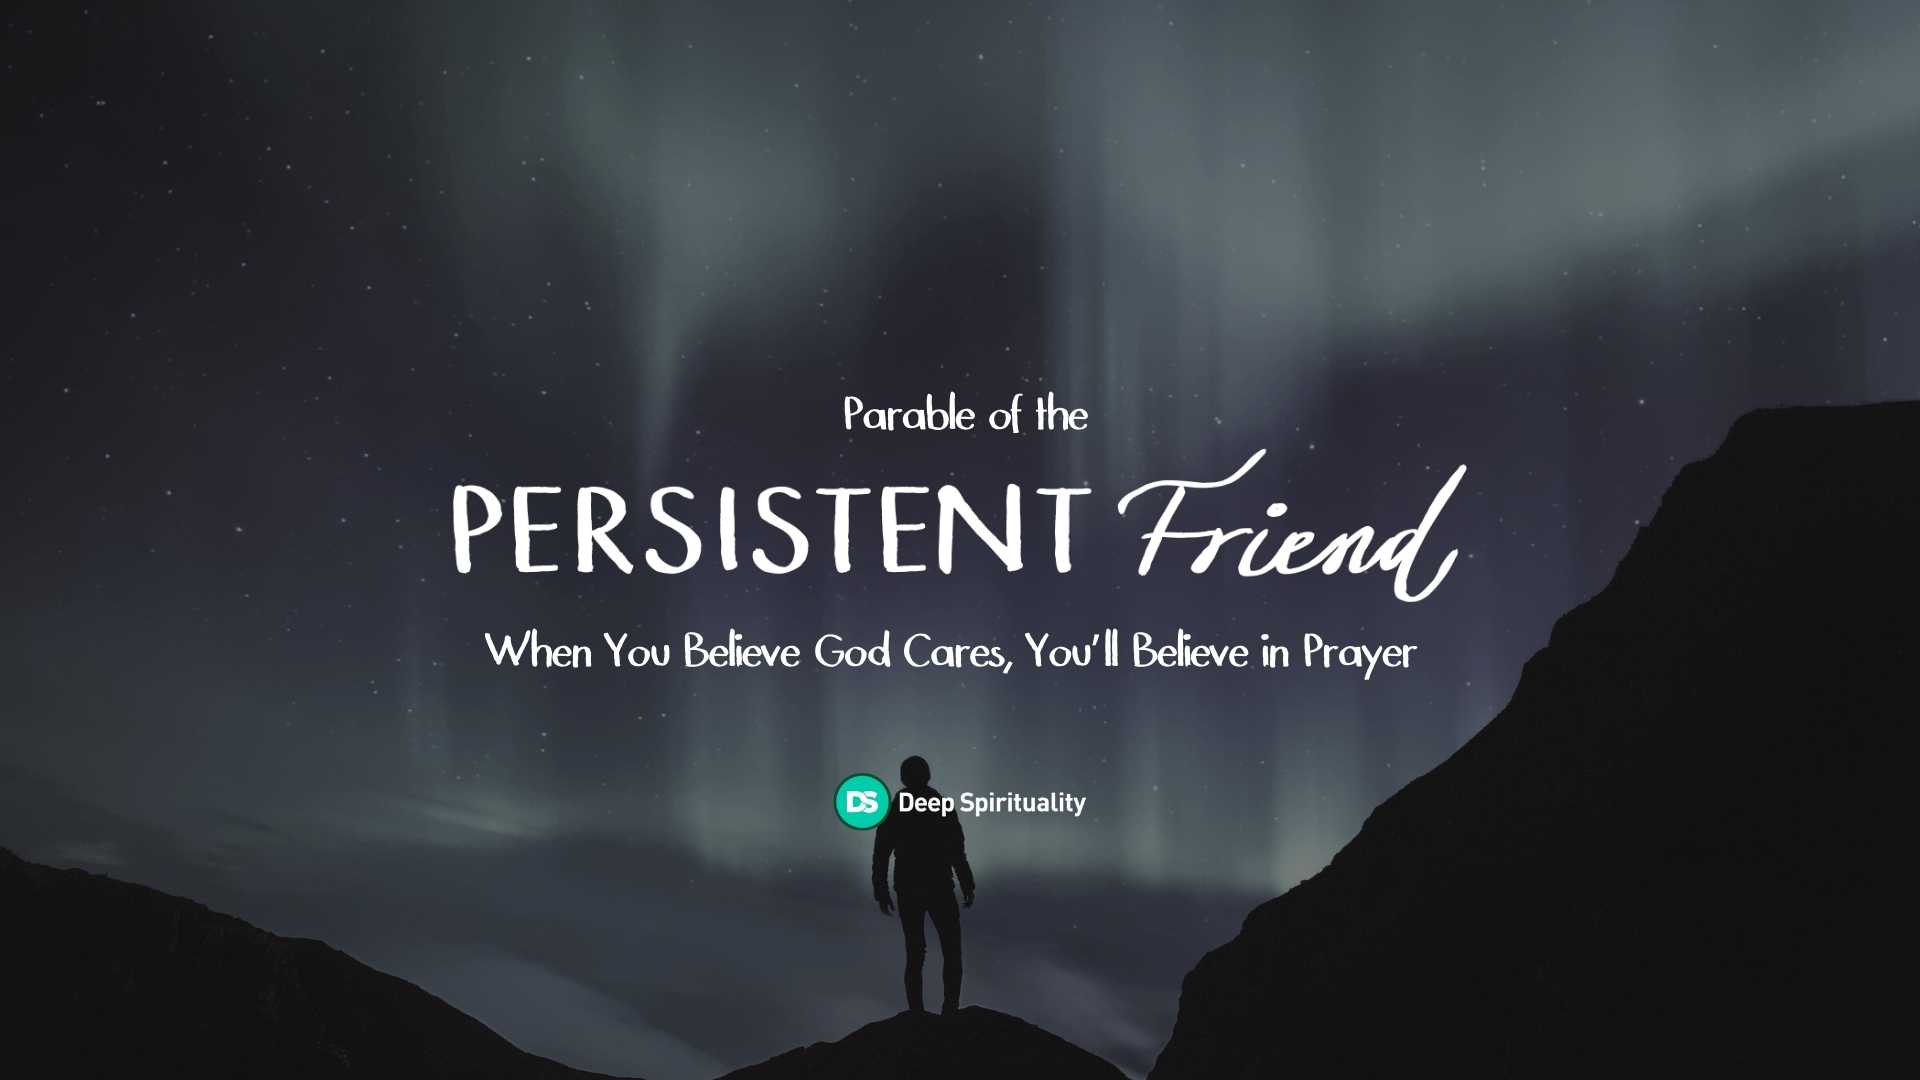 You Can Count On Me: What We Should Learn from the Parable of the Persistent Friend 7